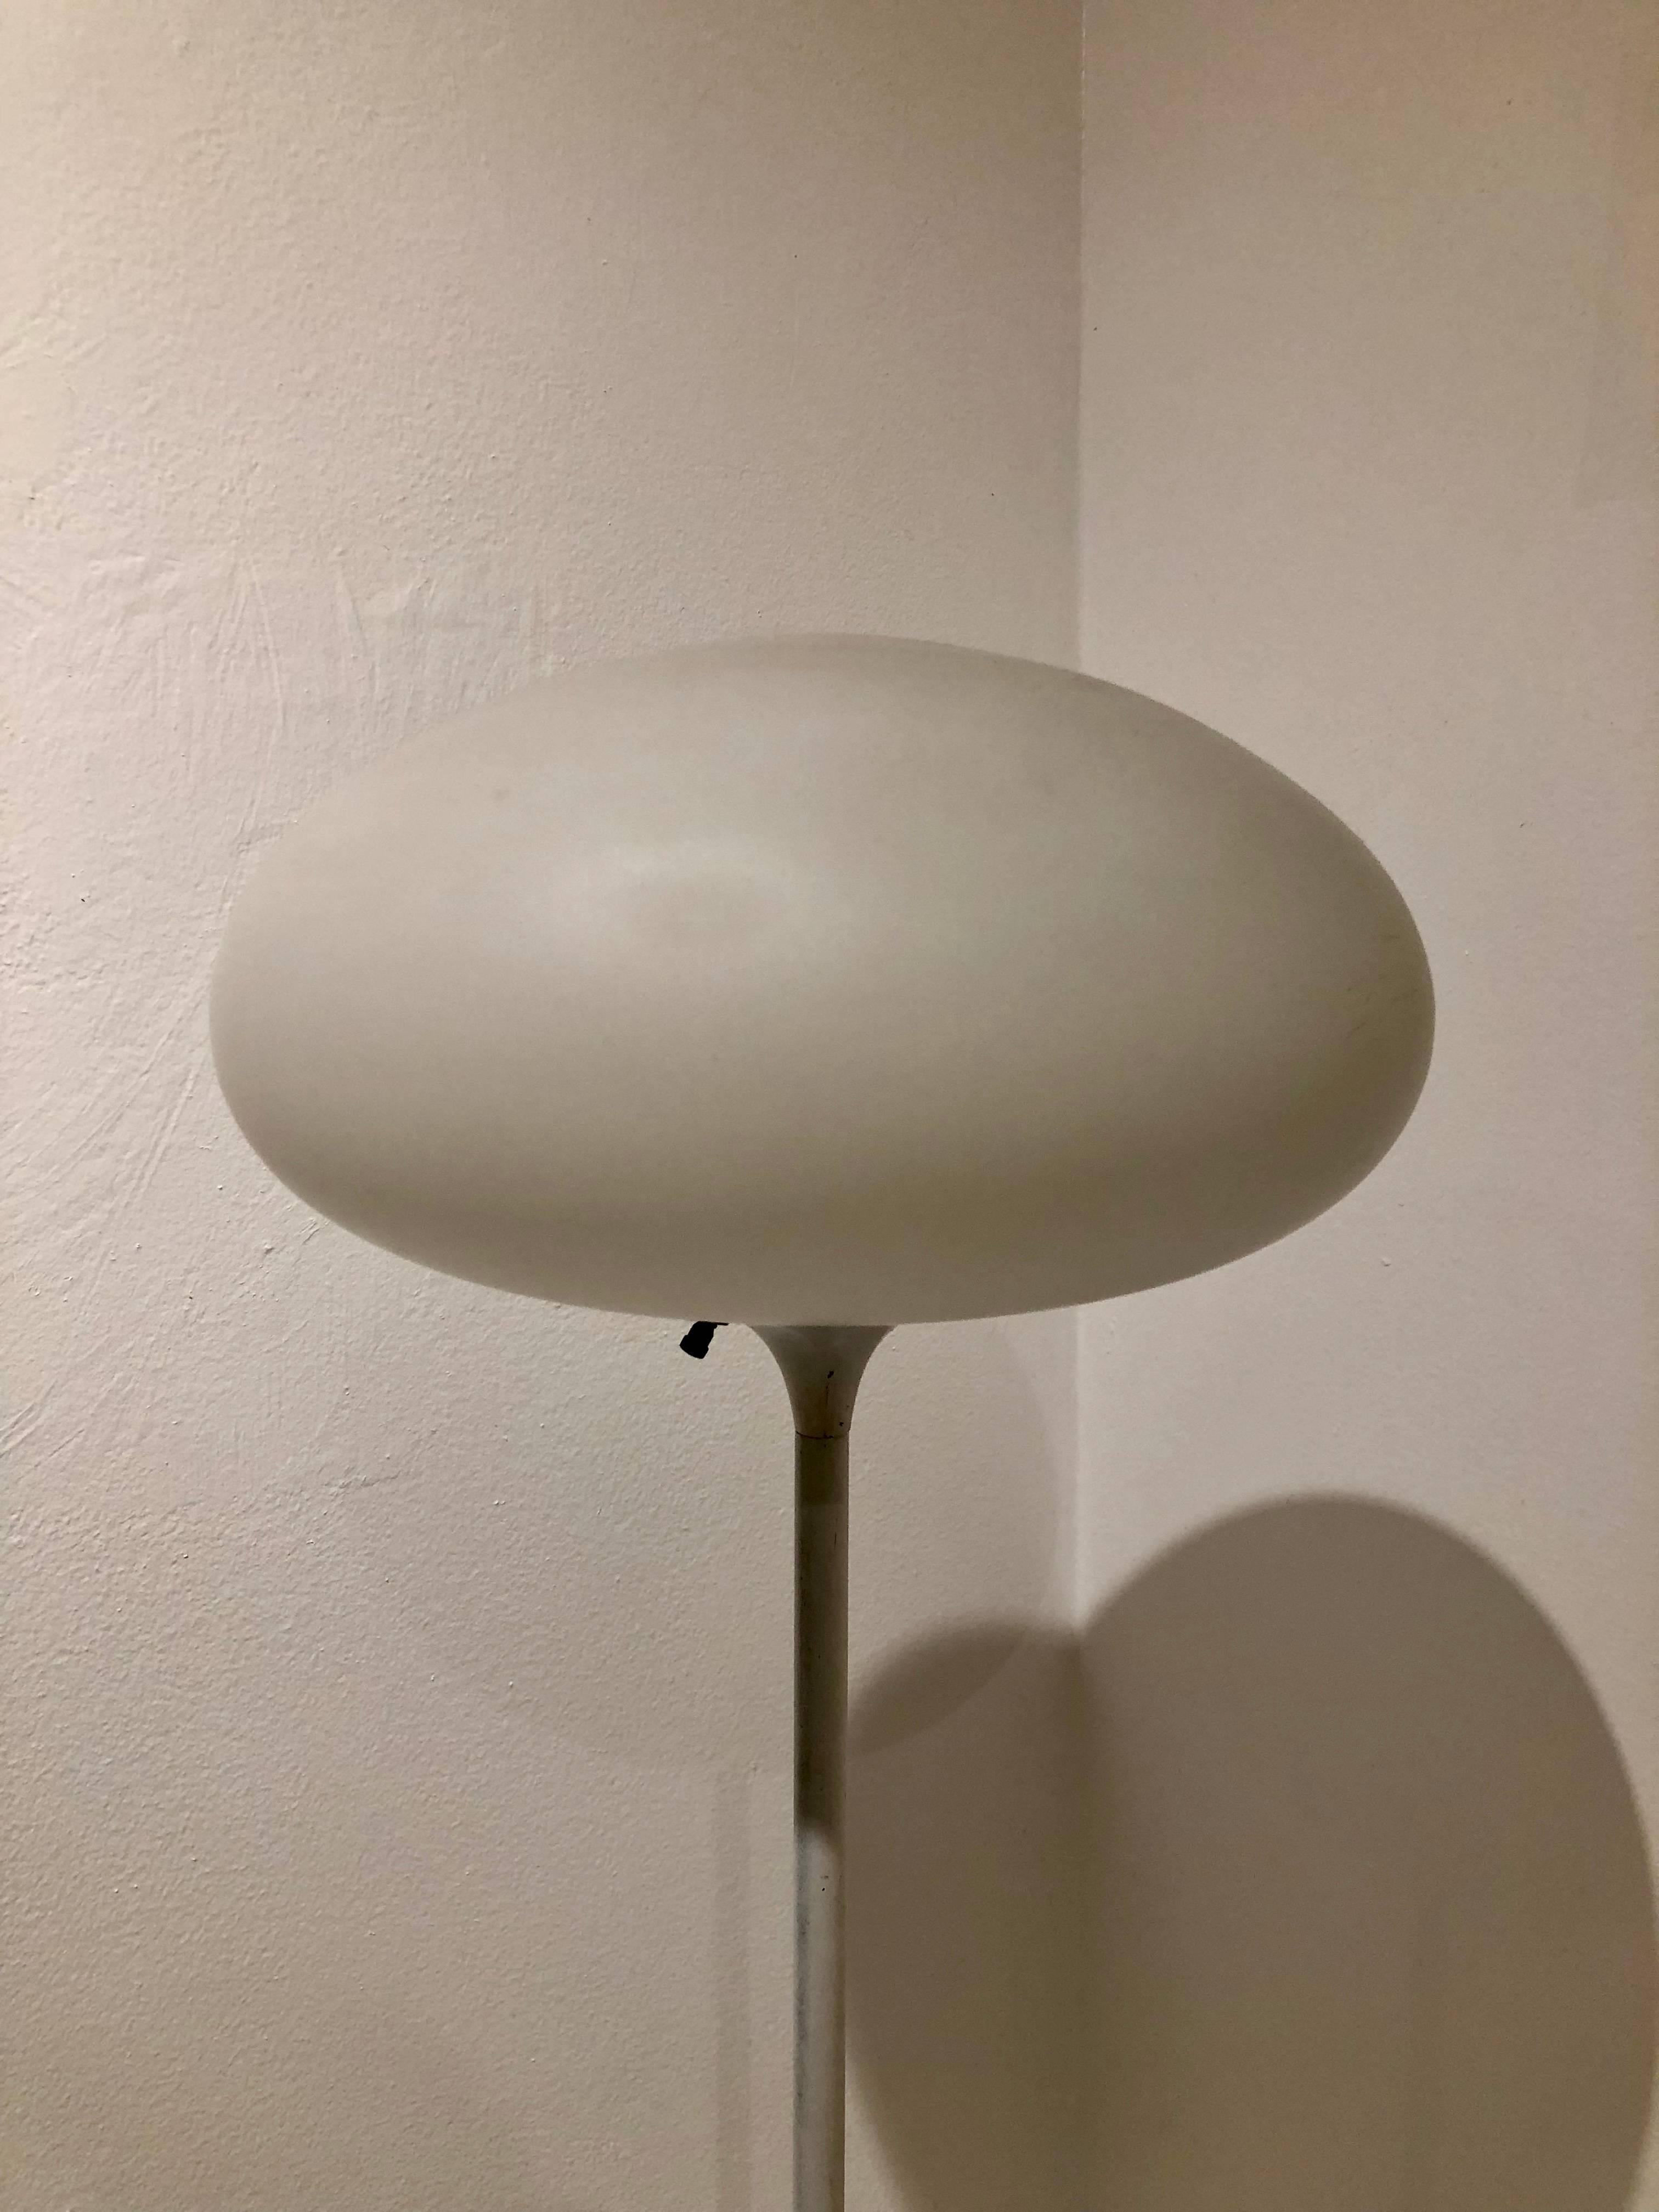 Iconic 1960s mushroom shade floor lamp, designed by Laurel, American, circa 1960s. The lamp comes in its original cream color finish some scuffs and marks due to age the Italian glass shade its in great condition, no chips or scratches. In perfect